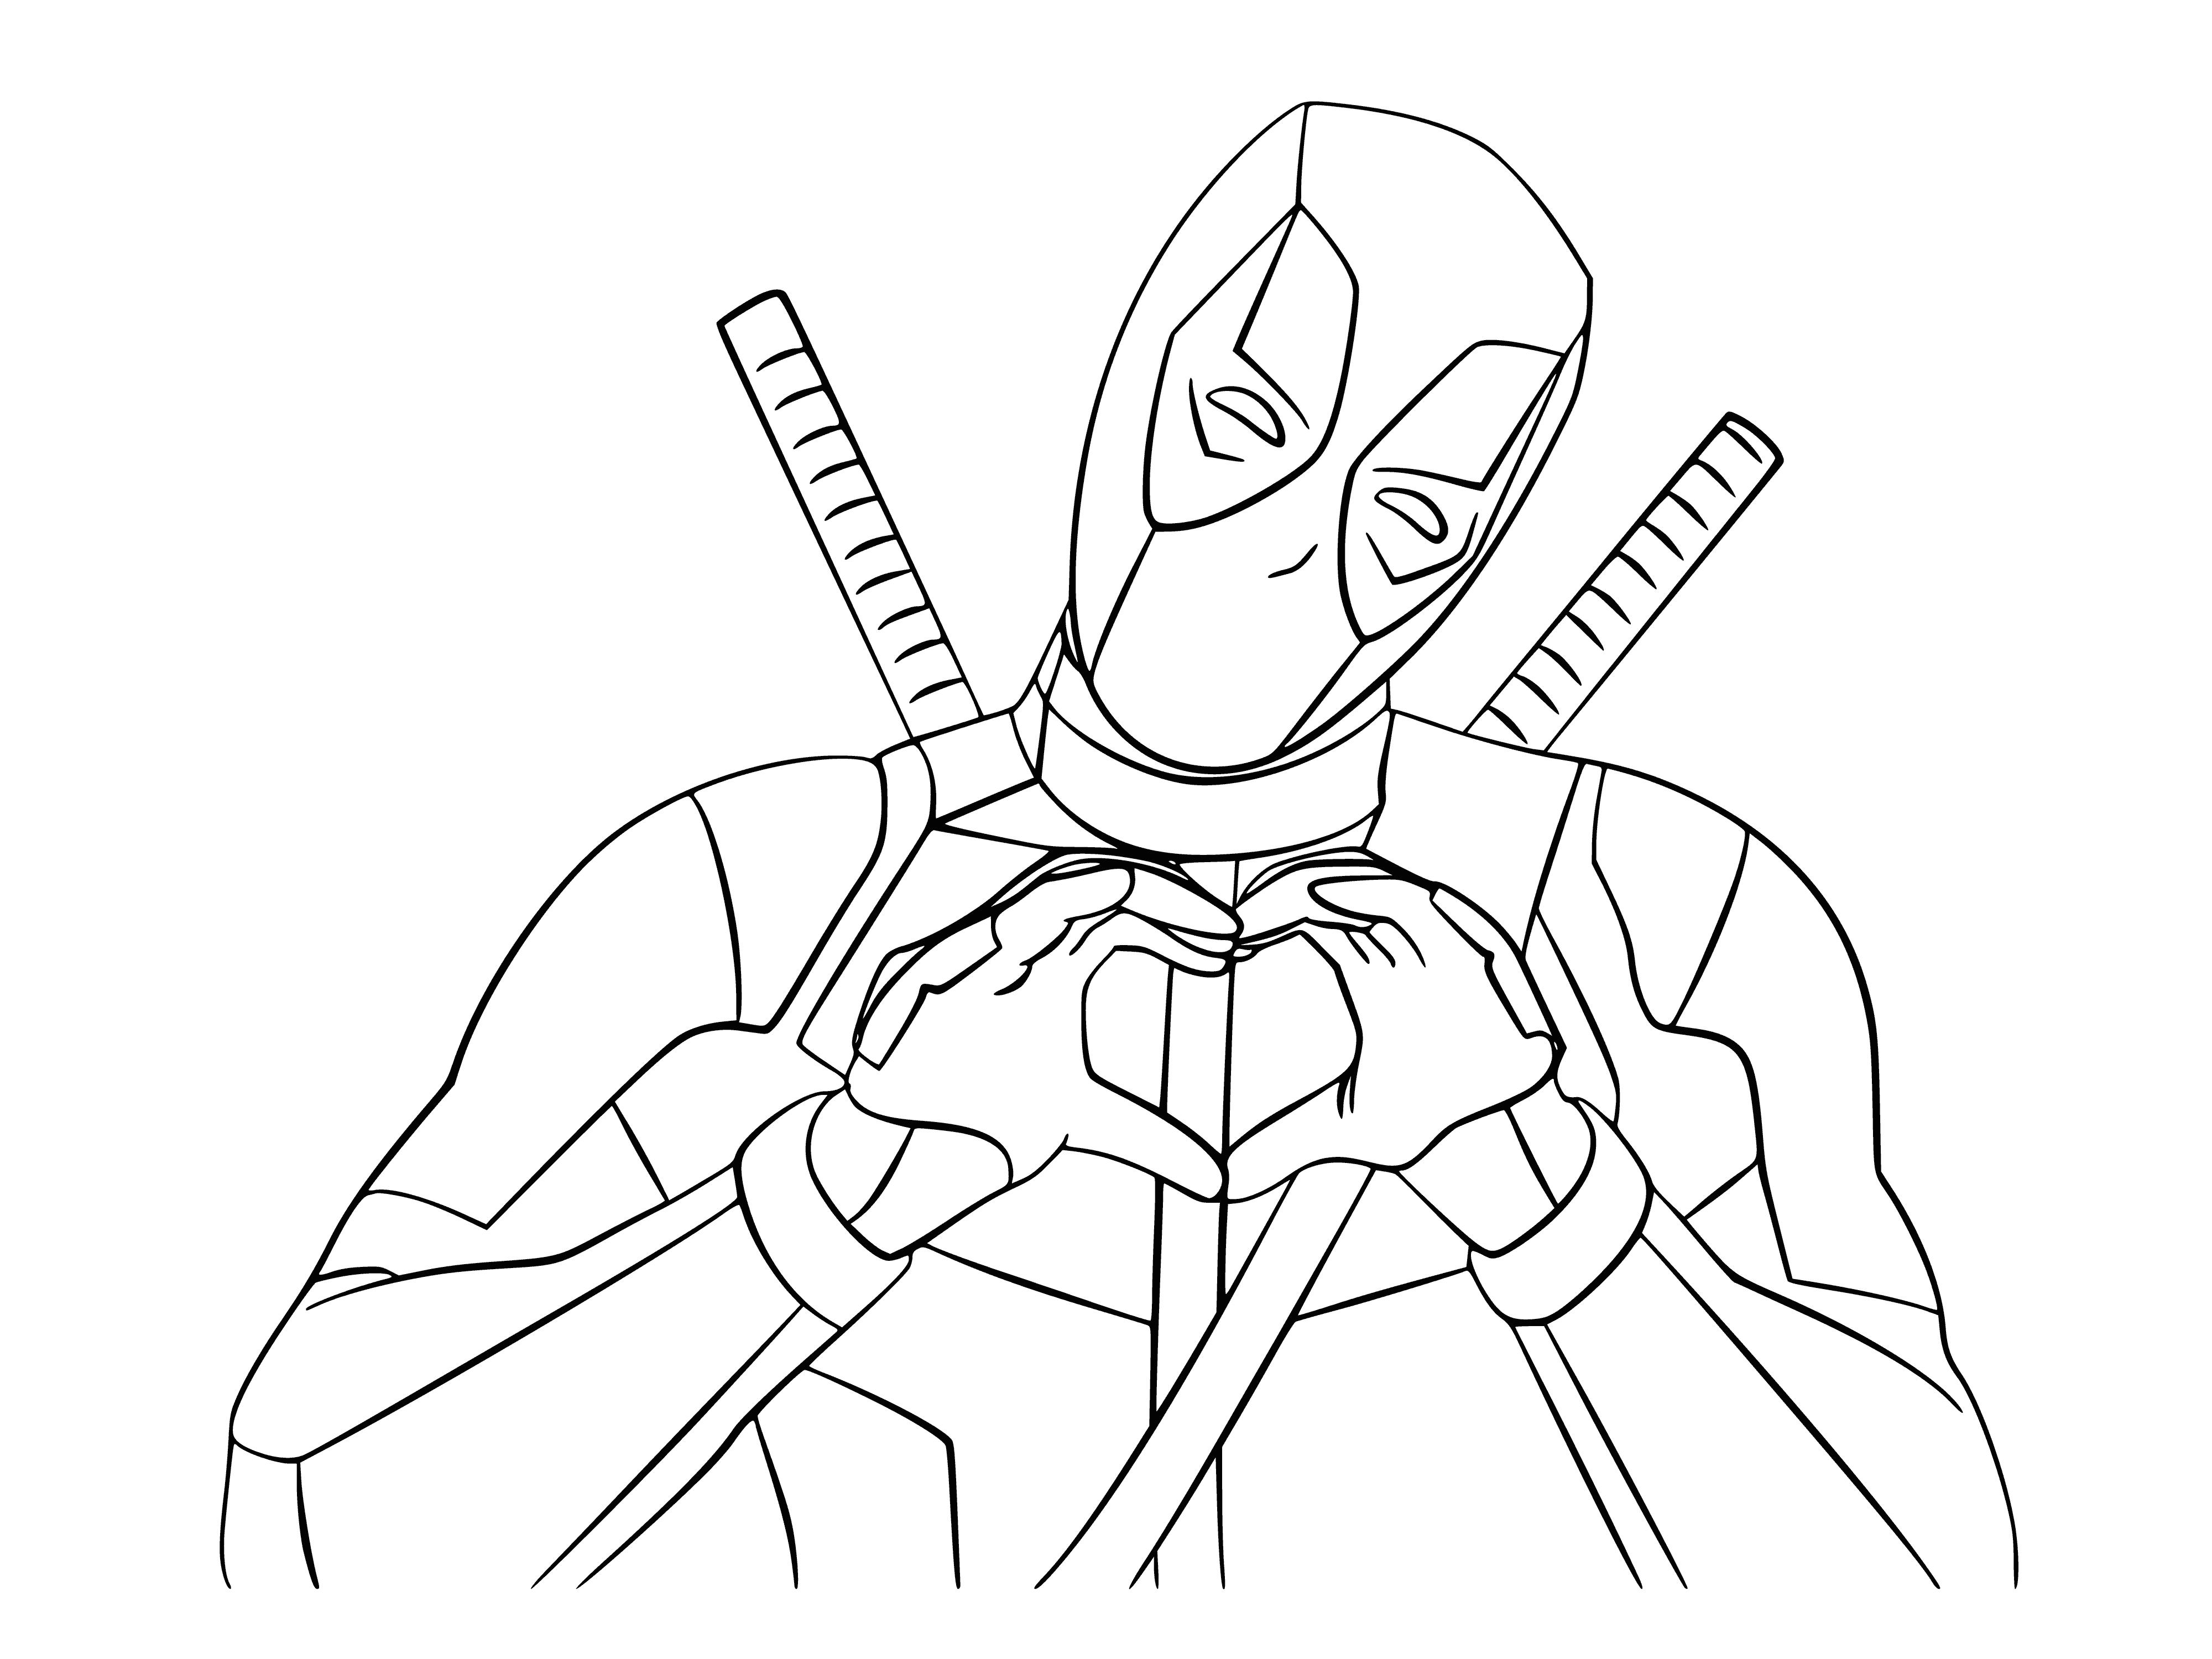 coloring page: Deadpool takes a blissful soak while surrounded by hearts - the perfect symbol of love!